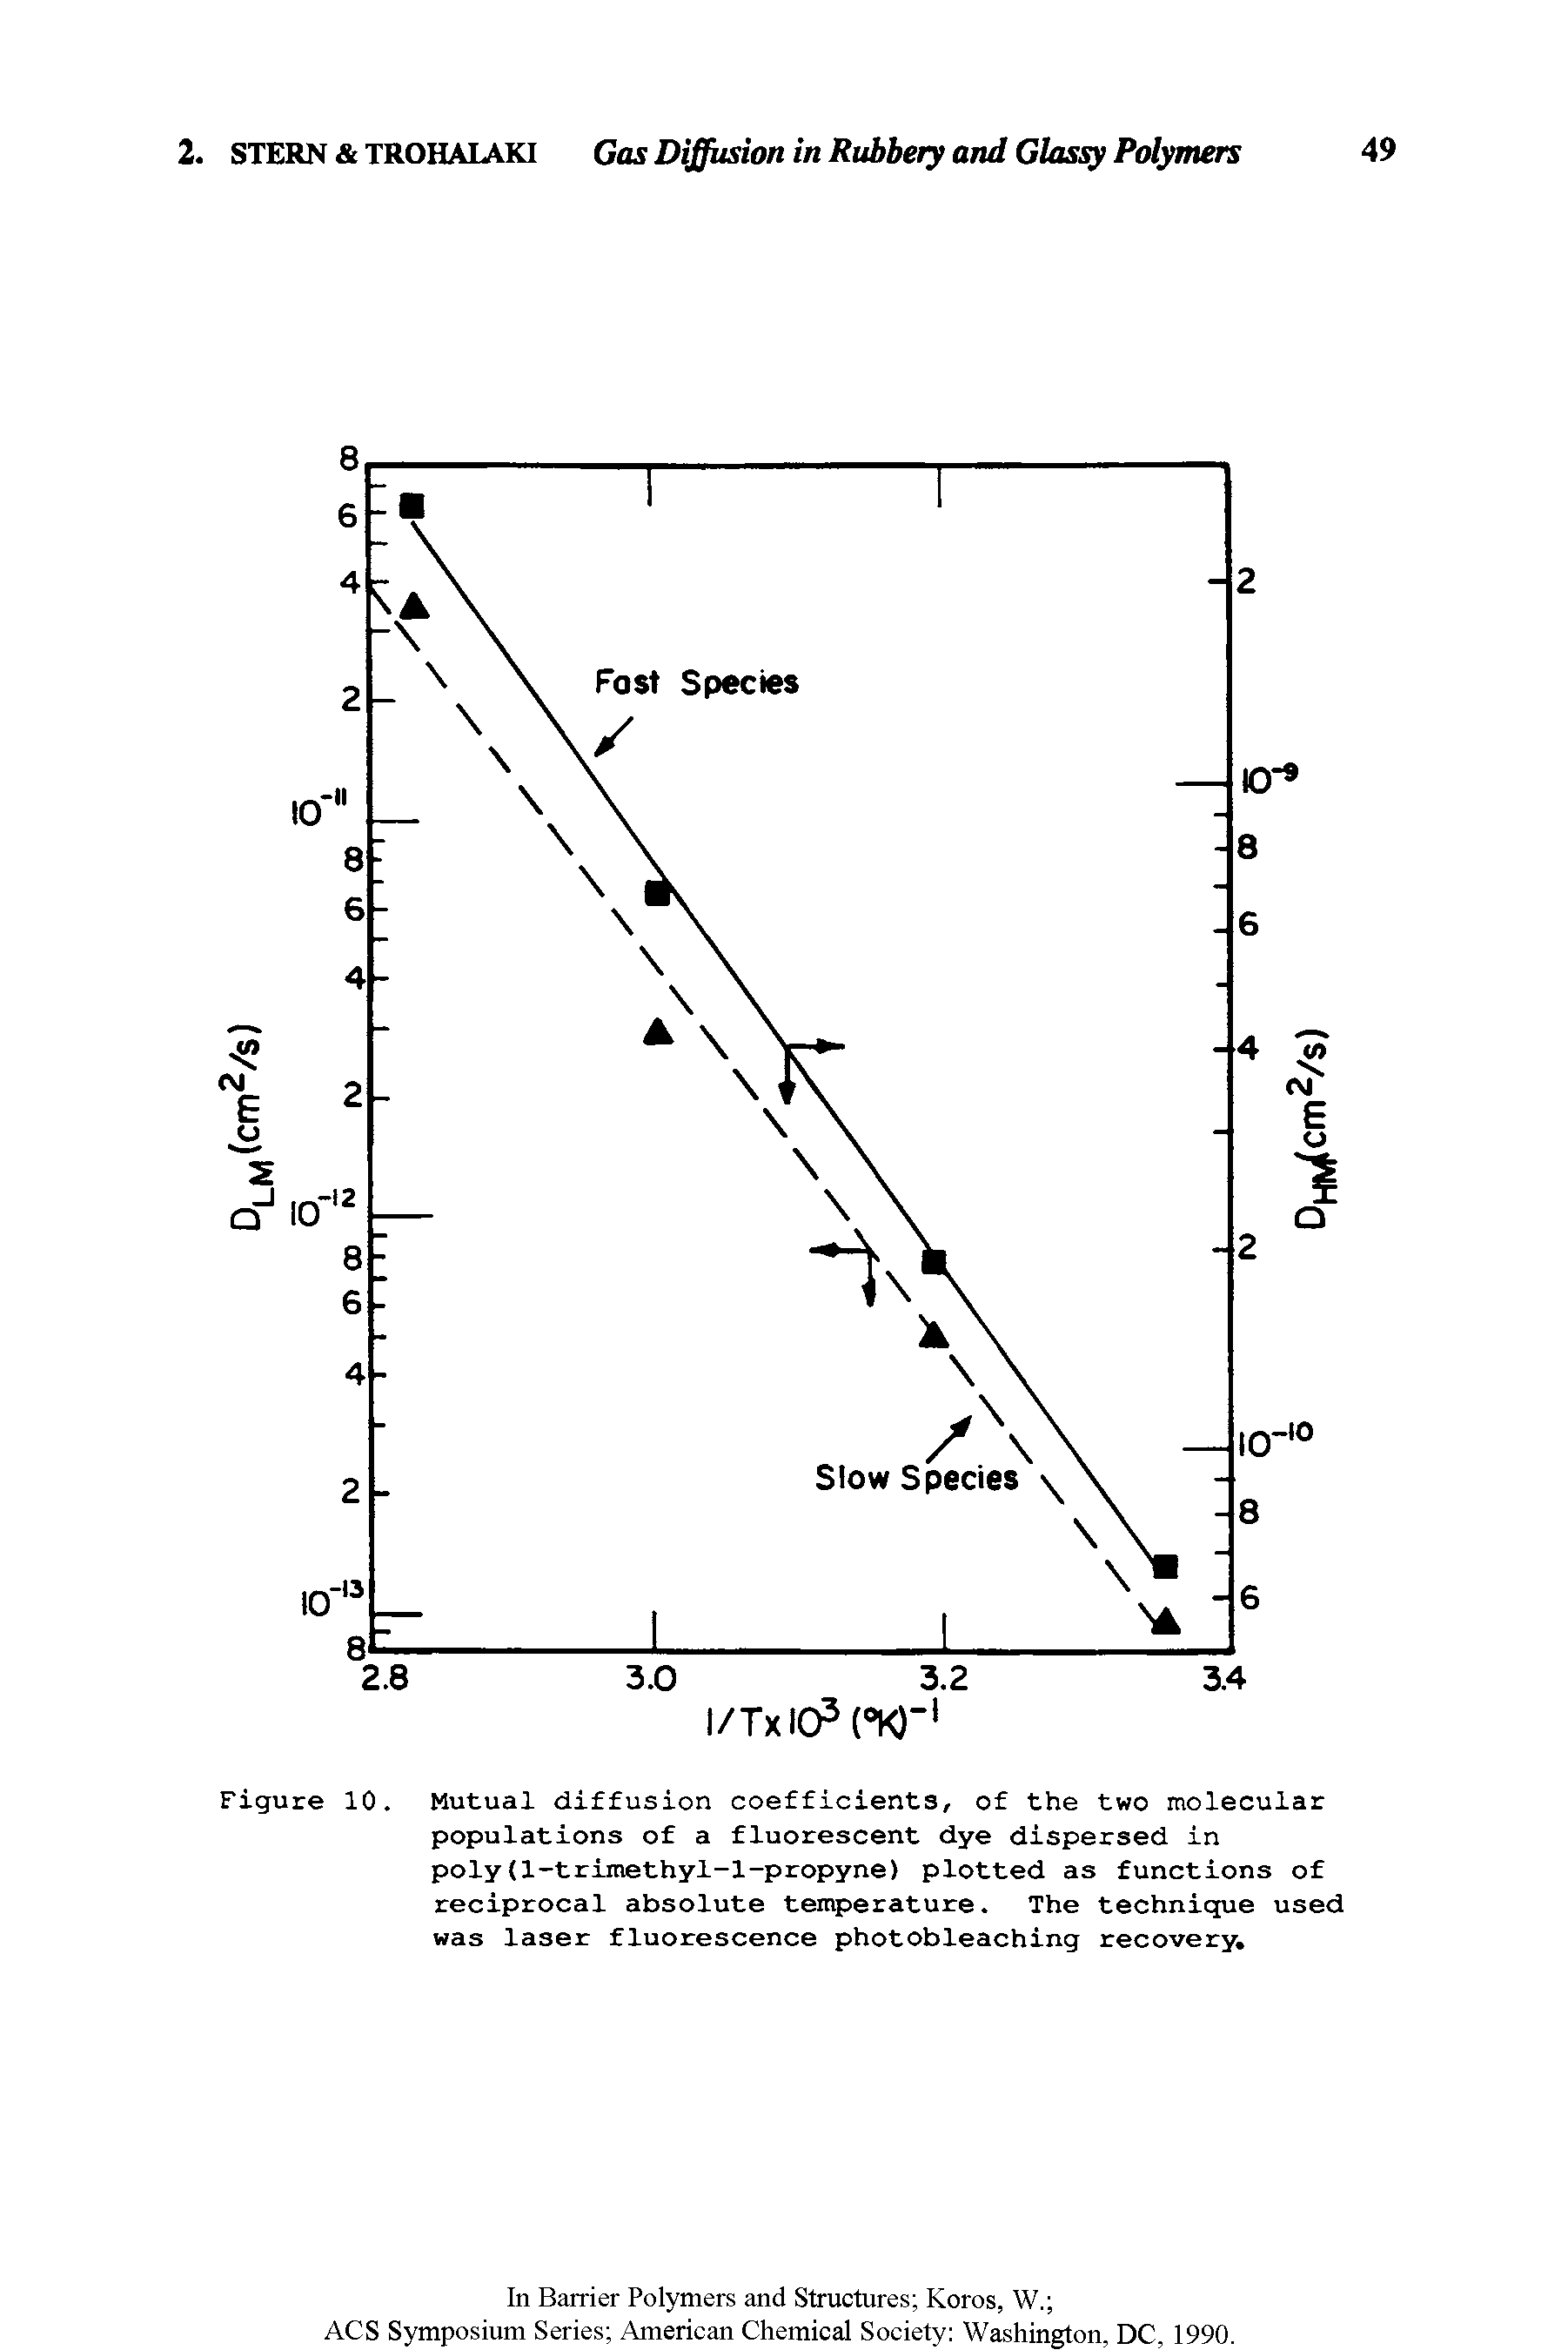 Figure 10. Mutual diffusion coefficients, of the two molecular populations of a fluorescent dye dispersed in poly(1-trimethyl-l-propyne) plotted as functions of reciprocal absolute temperature. The technique used was laser fluorescence photobleaching recovery.